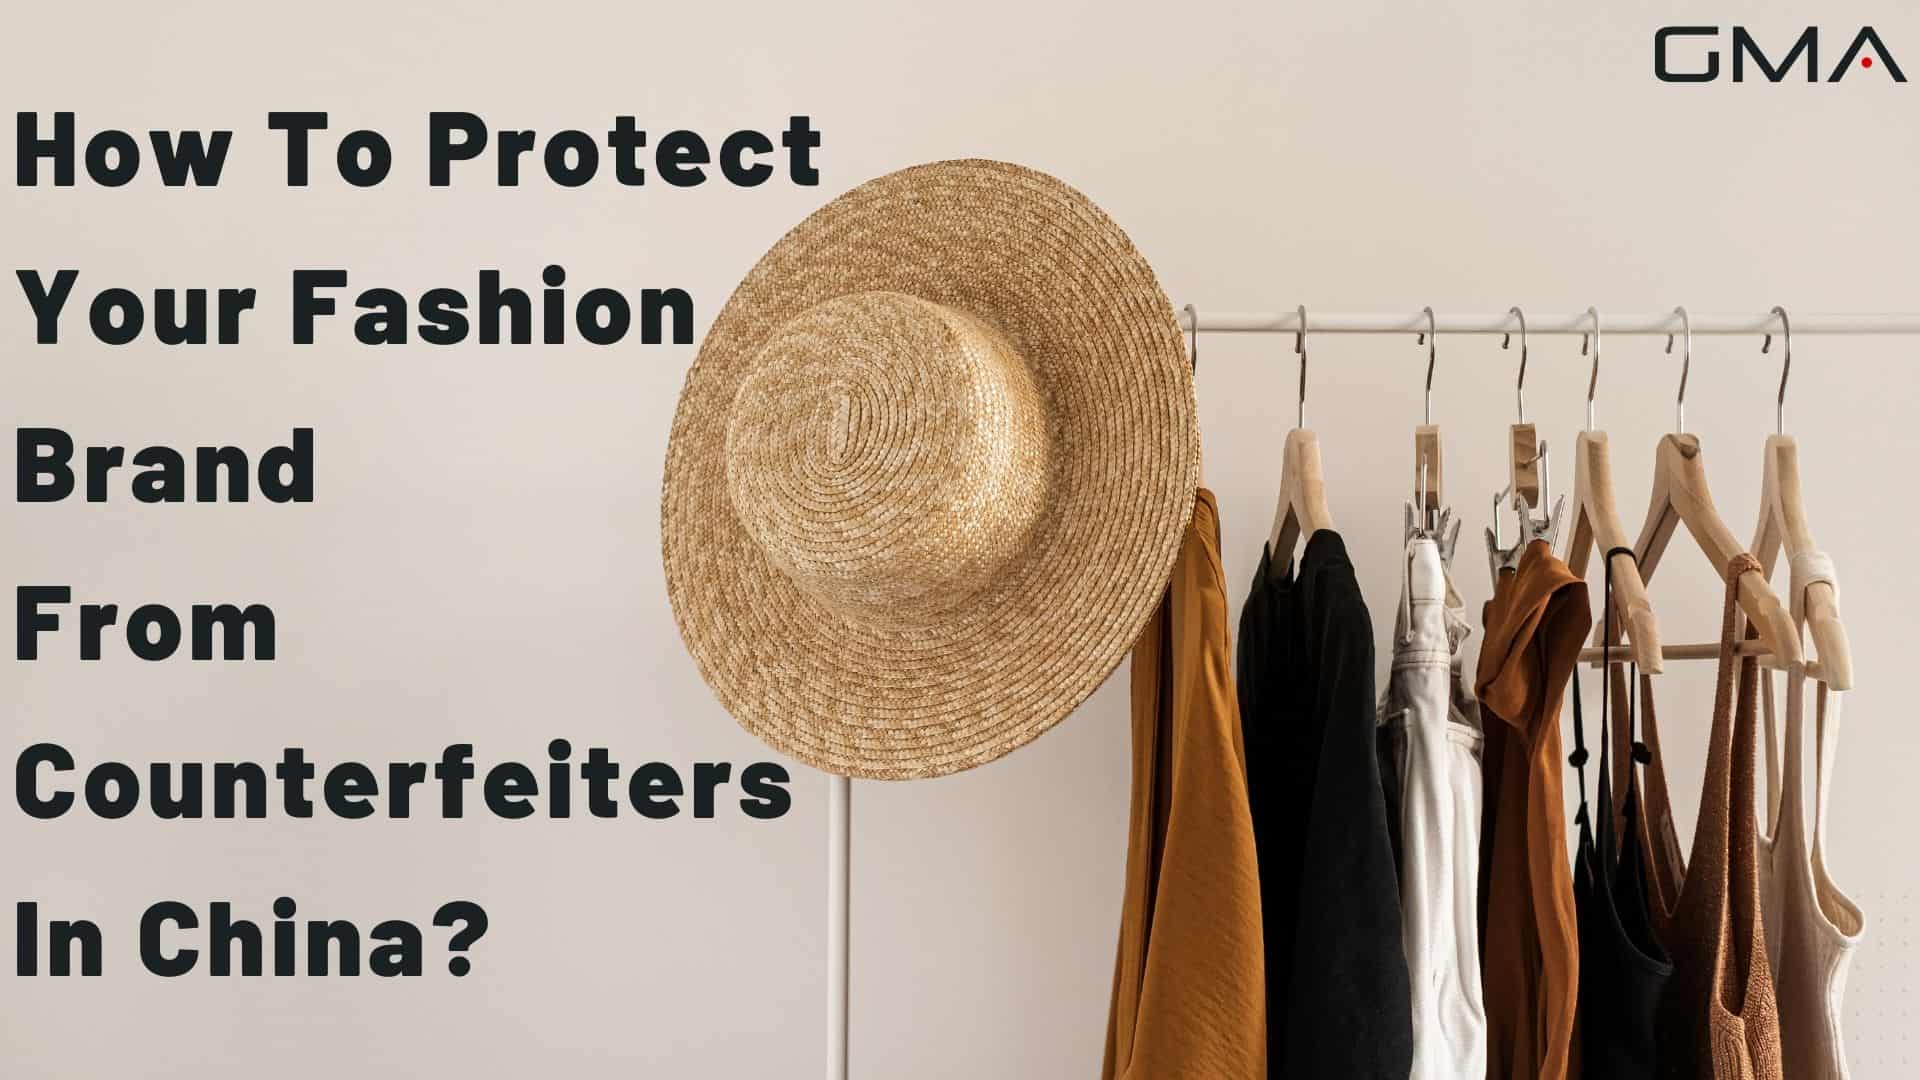 How To Protect Your Fashion Brand From Counterfeiters In China